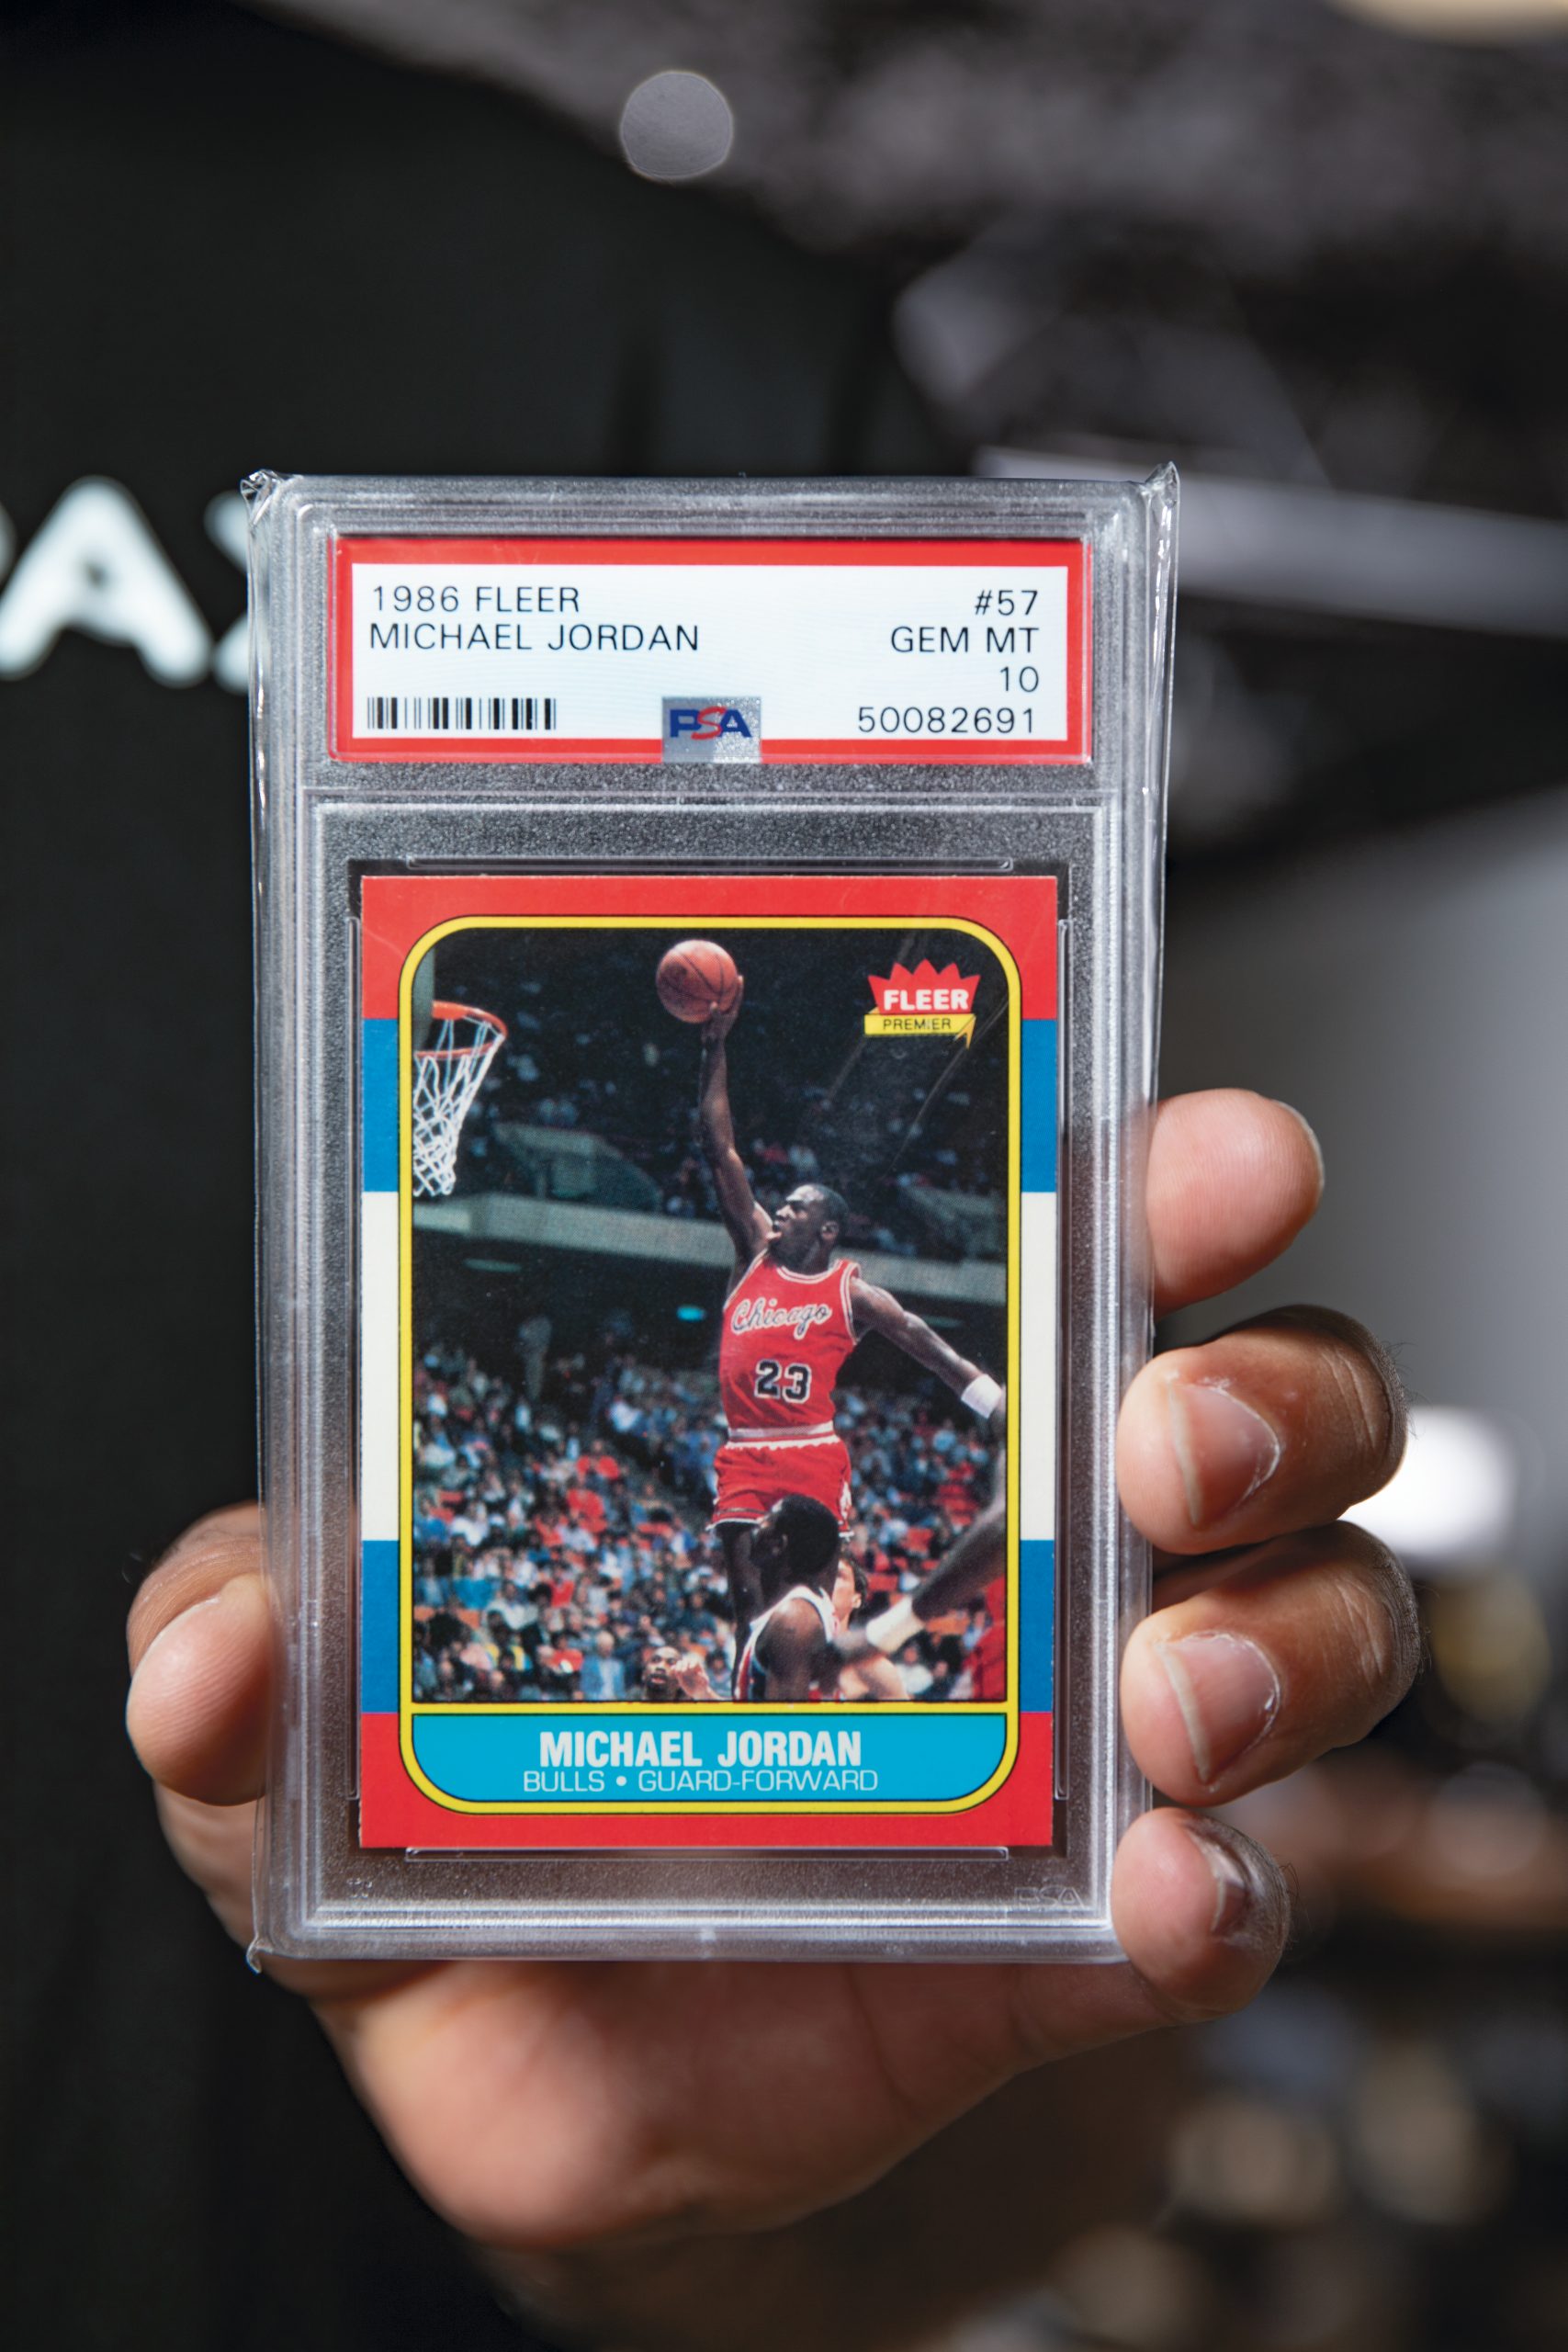 This iconic 1986 Michael Jordan rookie card in the highest PSA 10 grade was the first major collectible to have its ownership tokenized as an NFT. Similar copies have sold for $800,000.